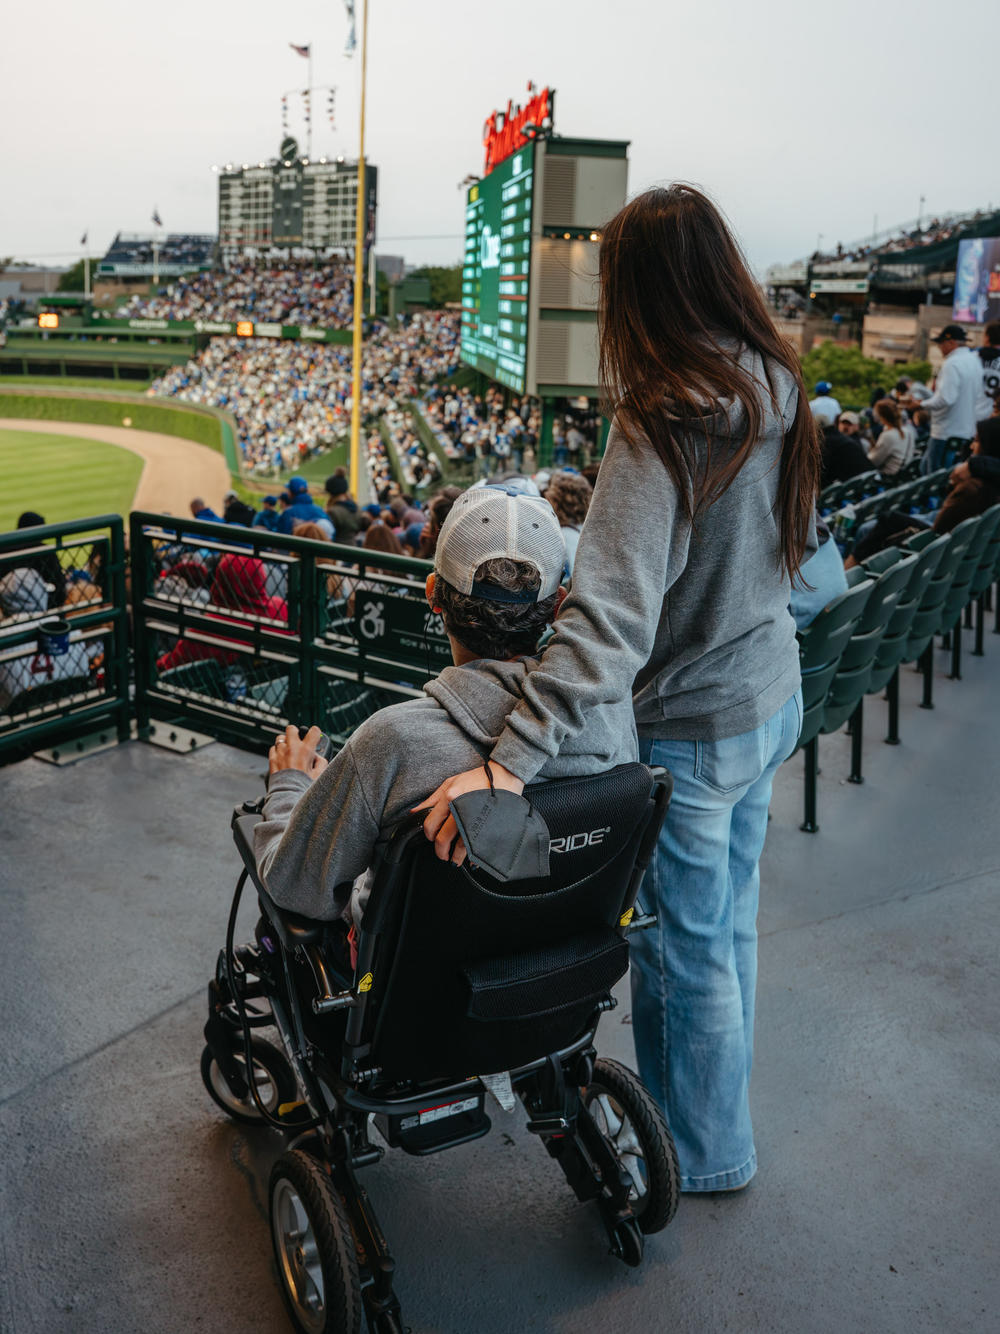 Wallach and his wife Sandra Abrevaya watch a Cubs game at Wrigley Field in June.